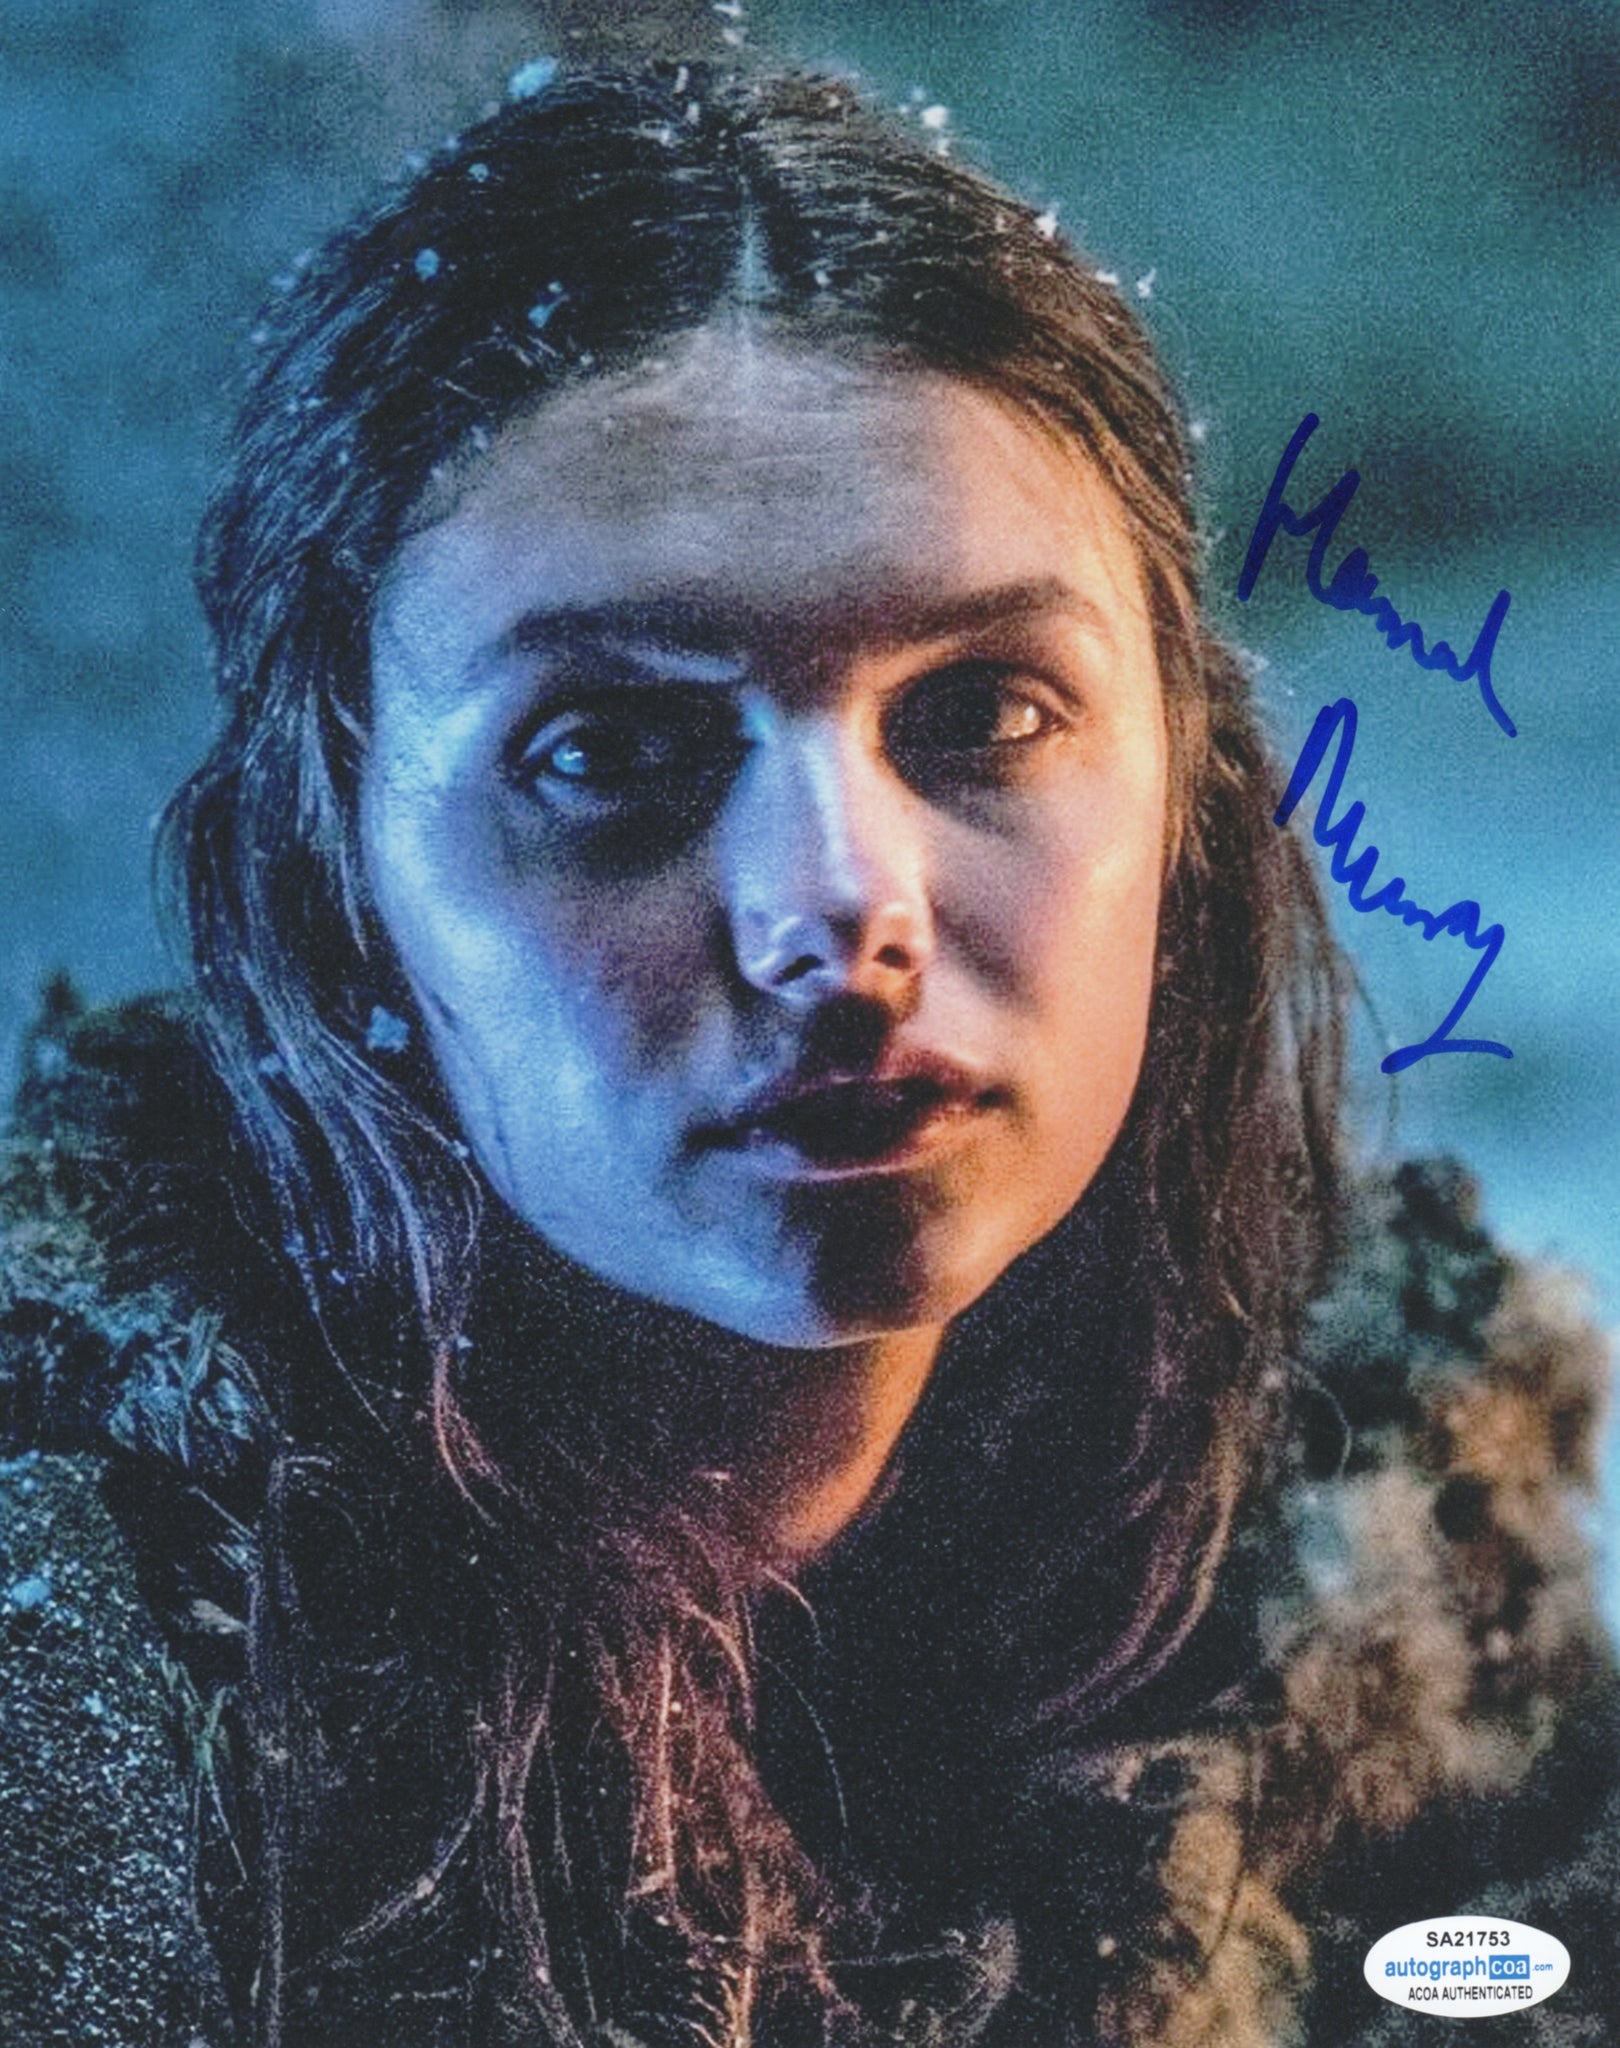 Hannah Murray Game of Thrones Signed Autograph 8x10 Photo ACOA #6 - Outlaw Hobbies Authentic Autographs